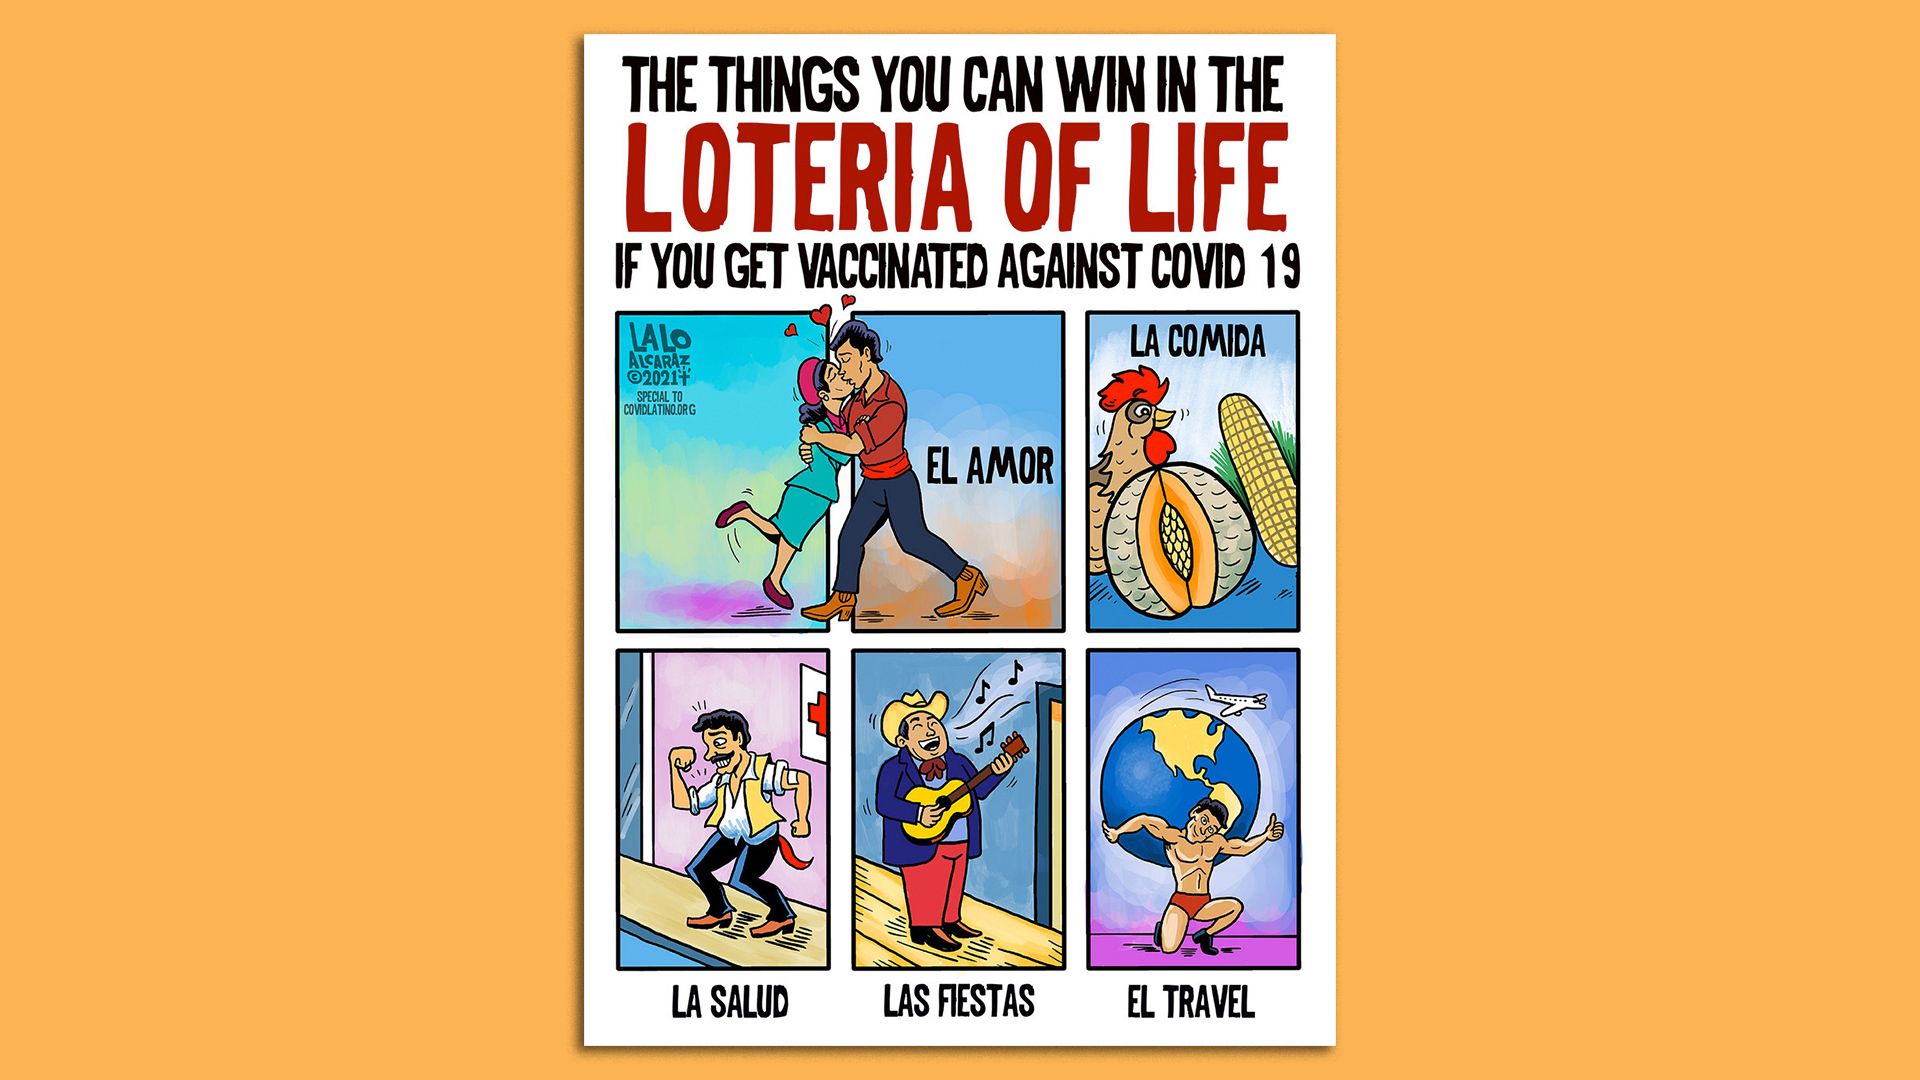 A cartoon of lotería cards, depicting what people will enjoy if they get vaccinated against COVID-19